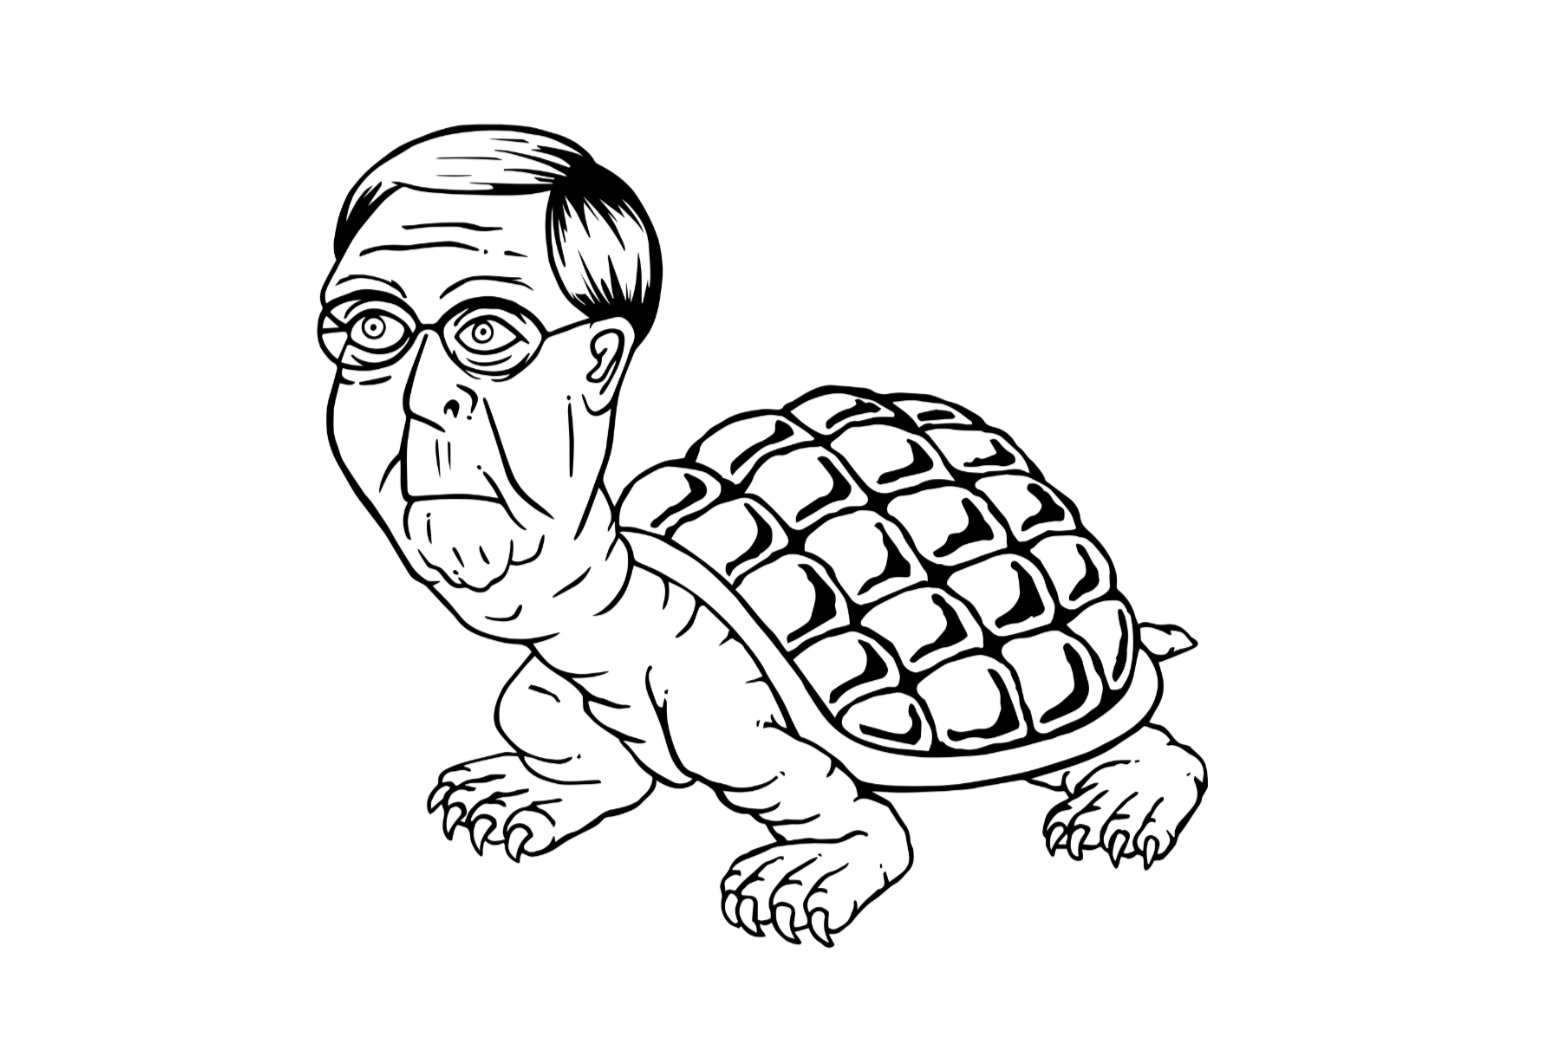 Fear The Turtle